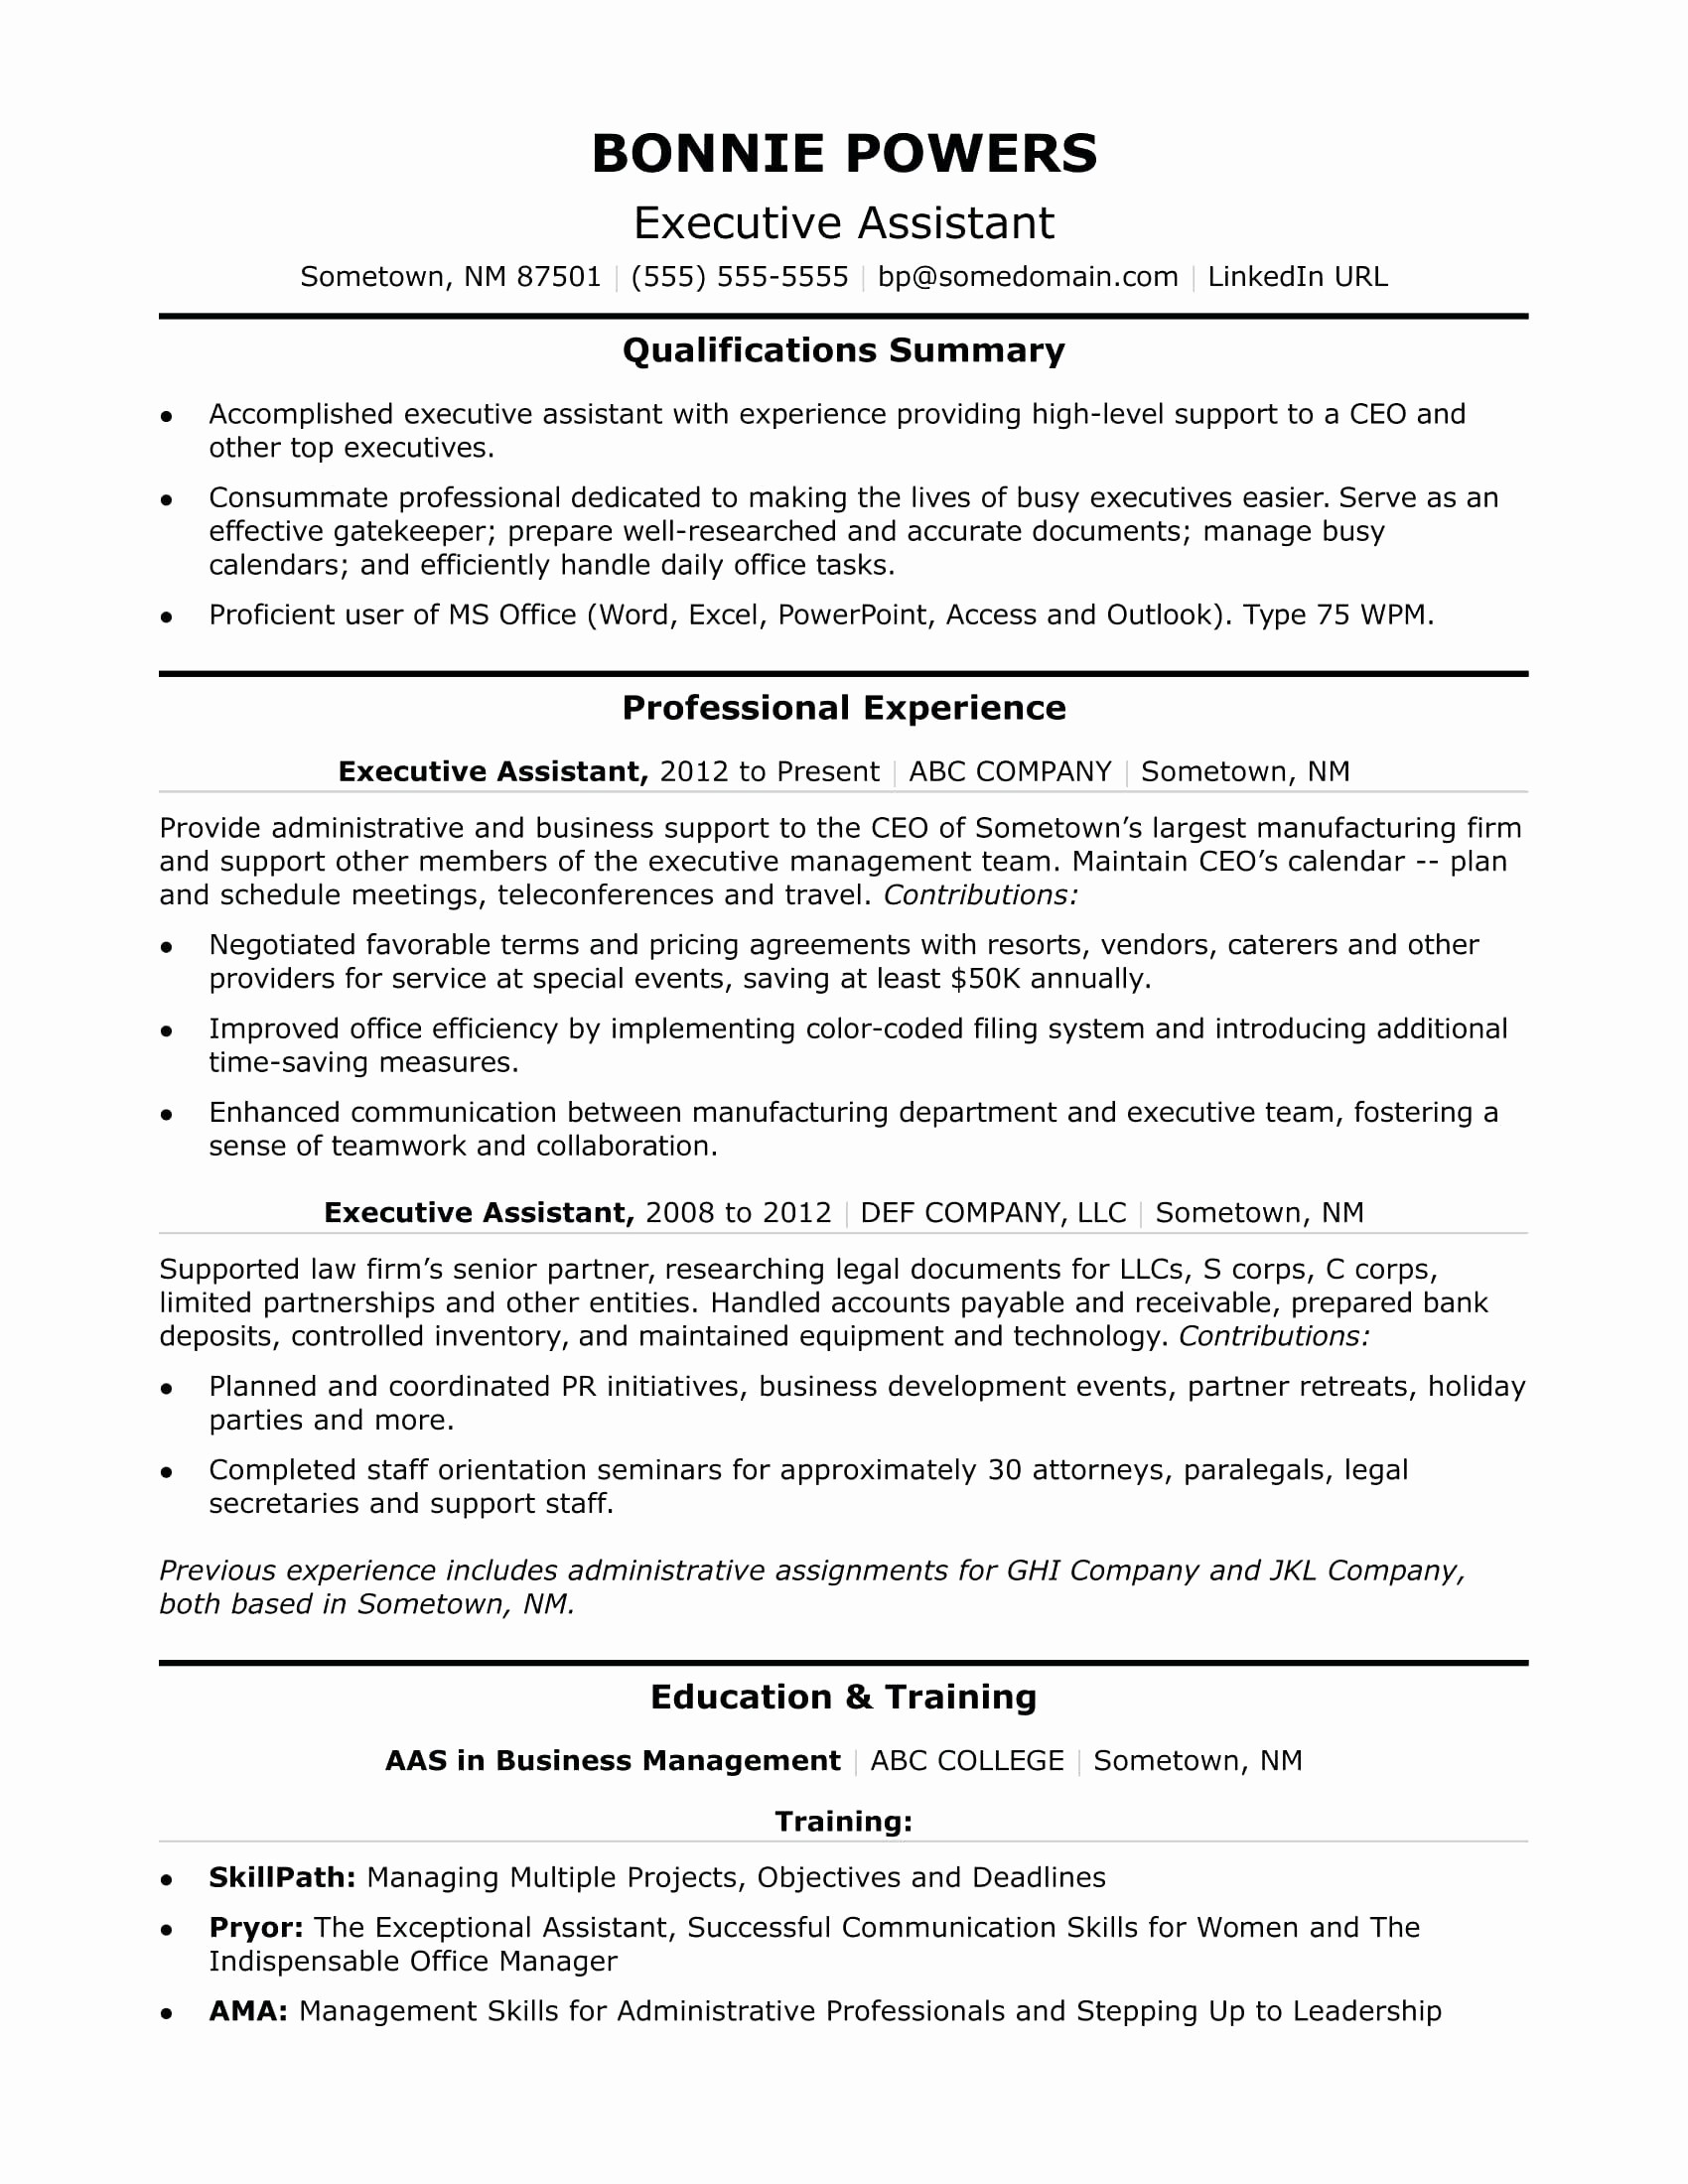 Executive assistant Travel Itinerary Template Elegant Executive assistant Travel Itinerary Template